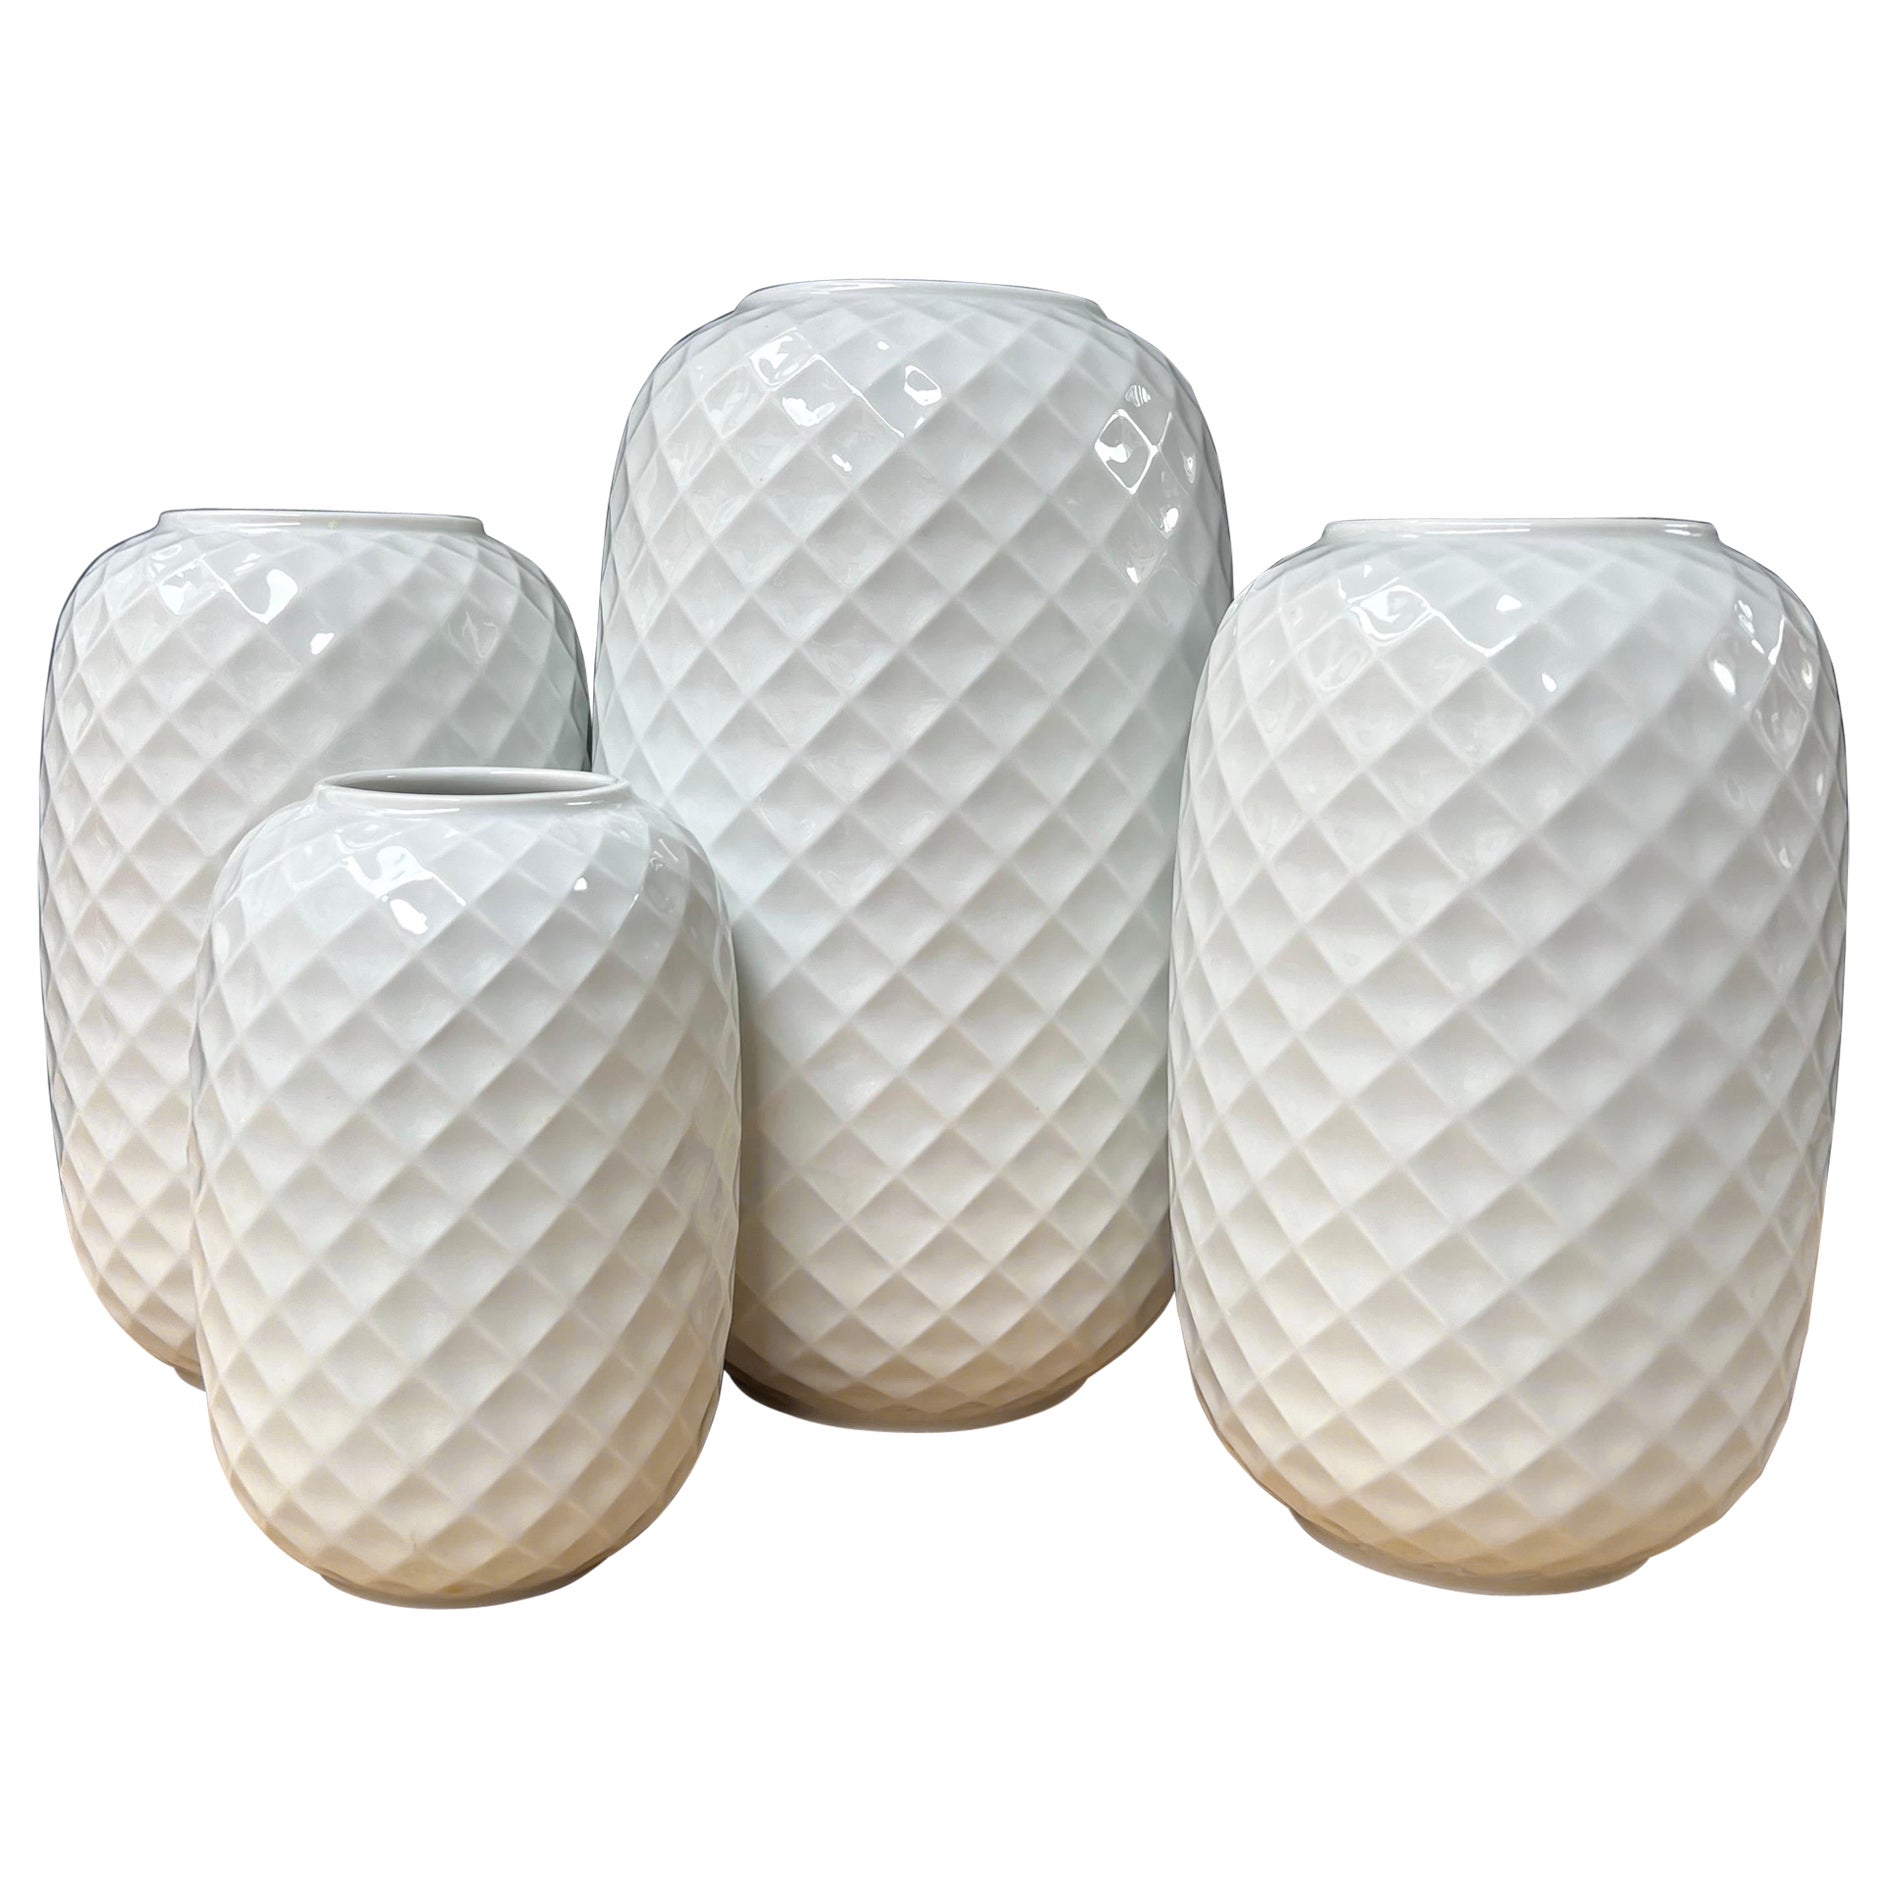 Set of 4 Holiday Vases, White Honeycomb Relief., Porcelain, Thomas/Germany 1960 For Sale